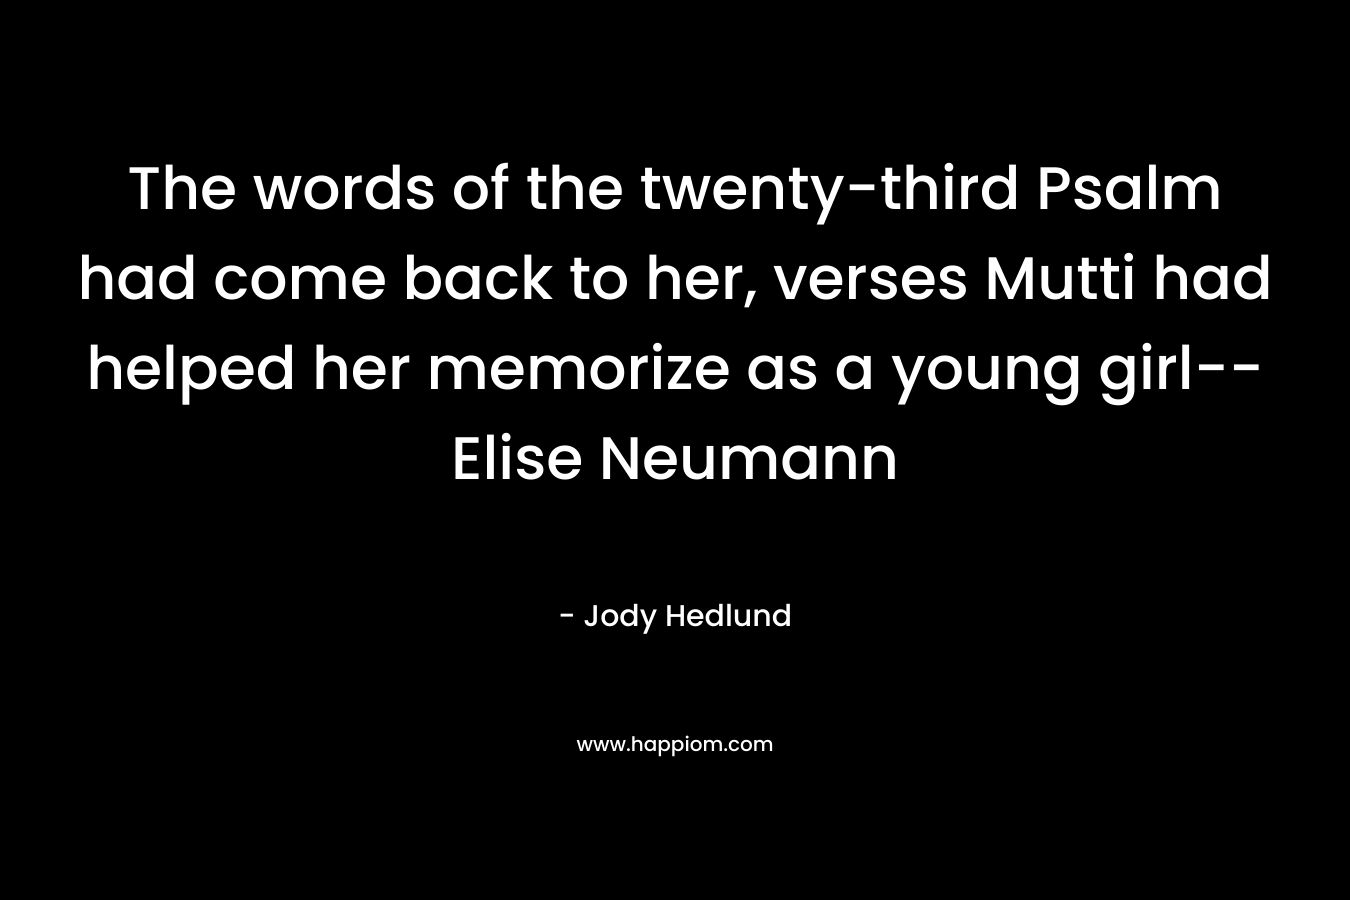 The words of the twenty-third Psalm had come back to her, verses Mutti had helped her memorize as a young girl--Elise Neumann